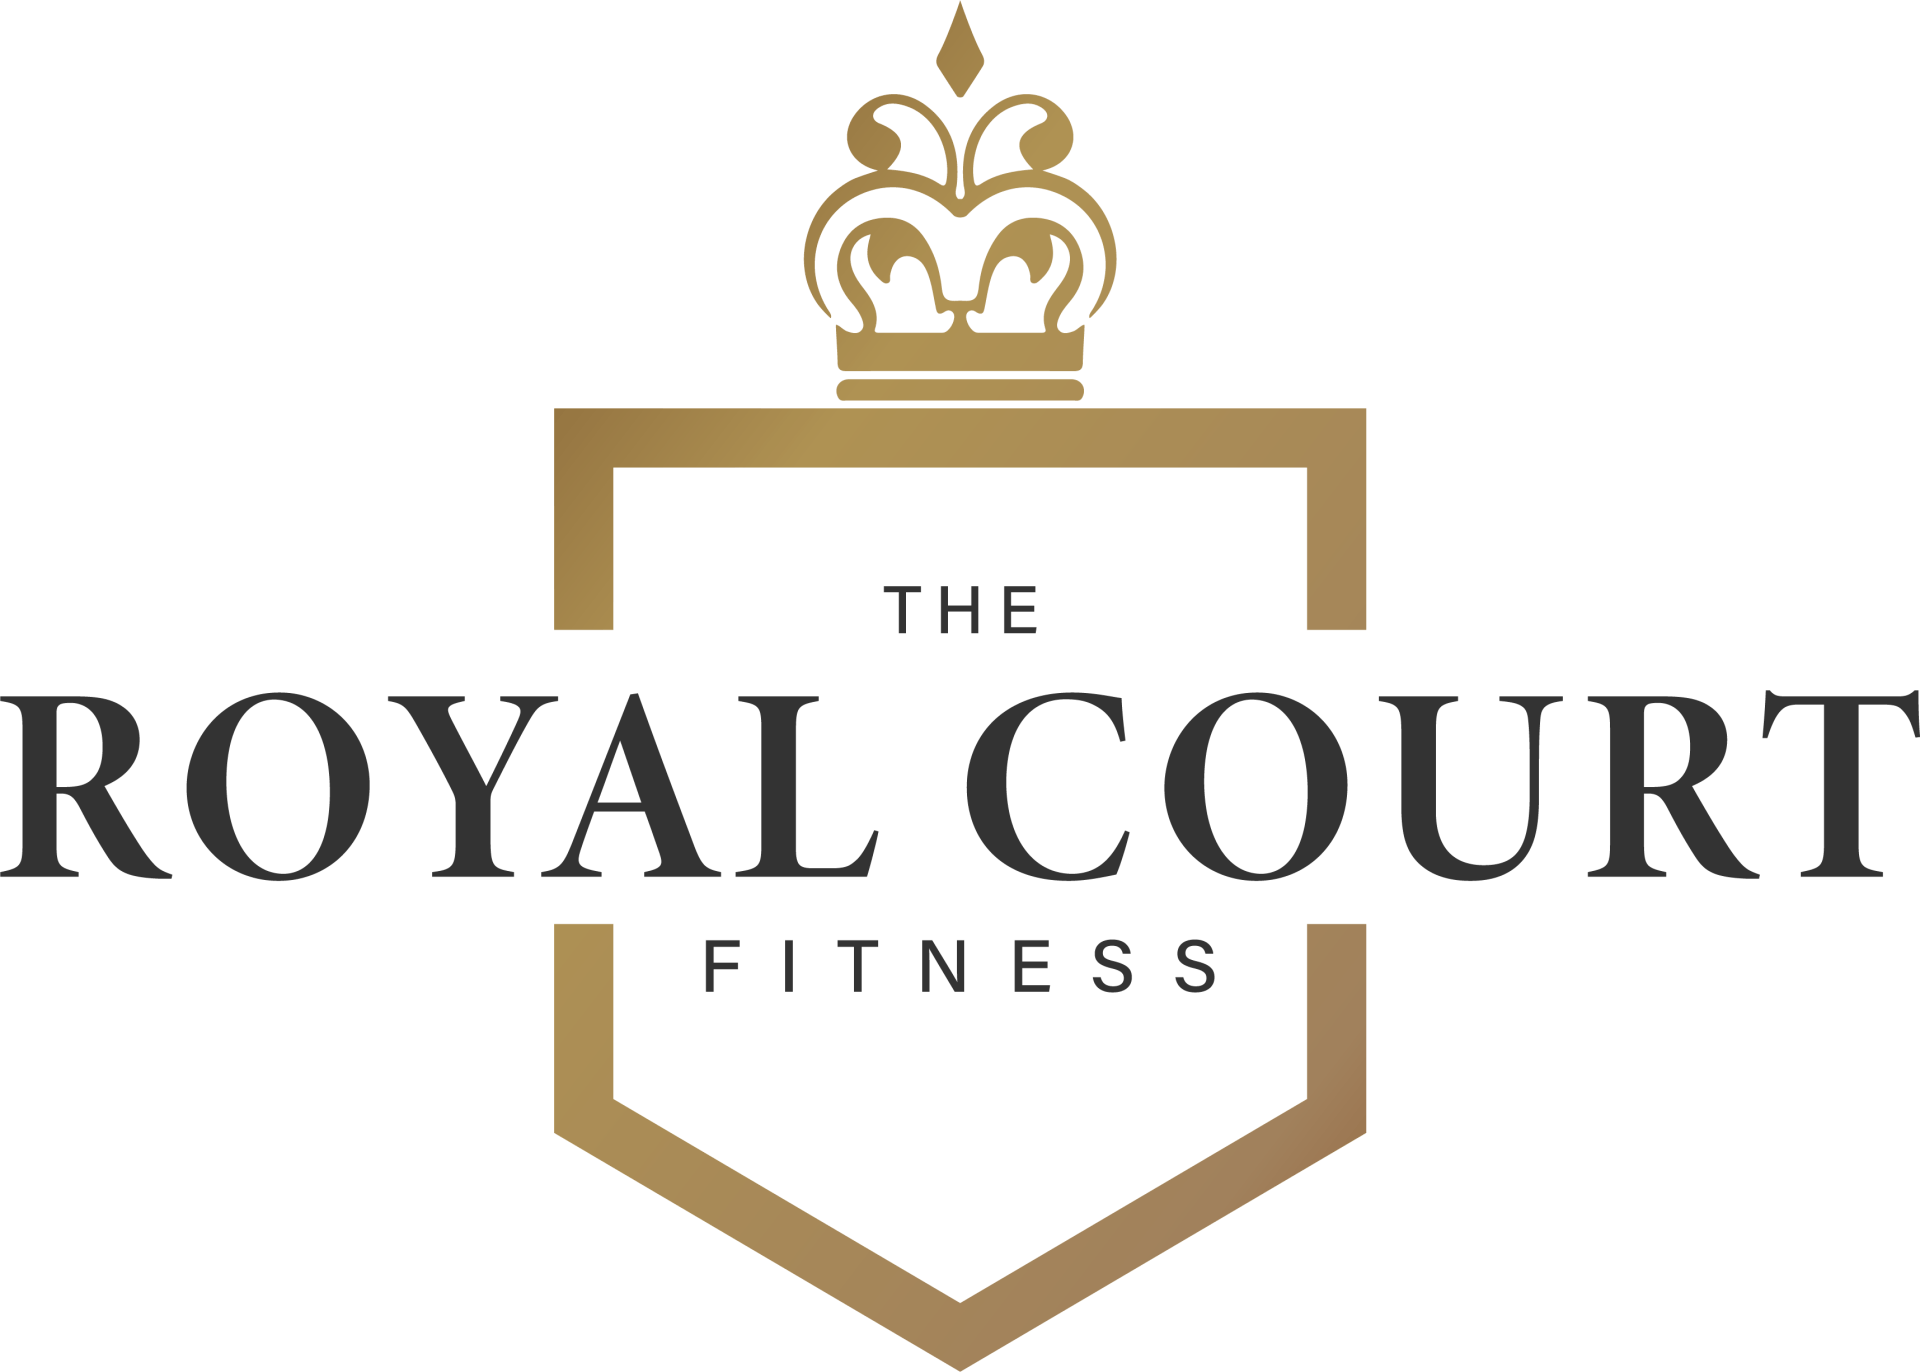 The Royal Court Fitness